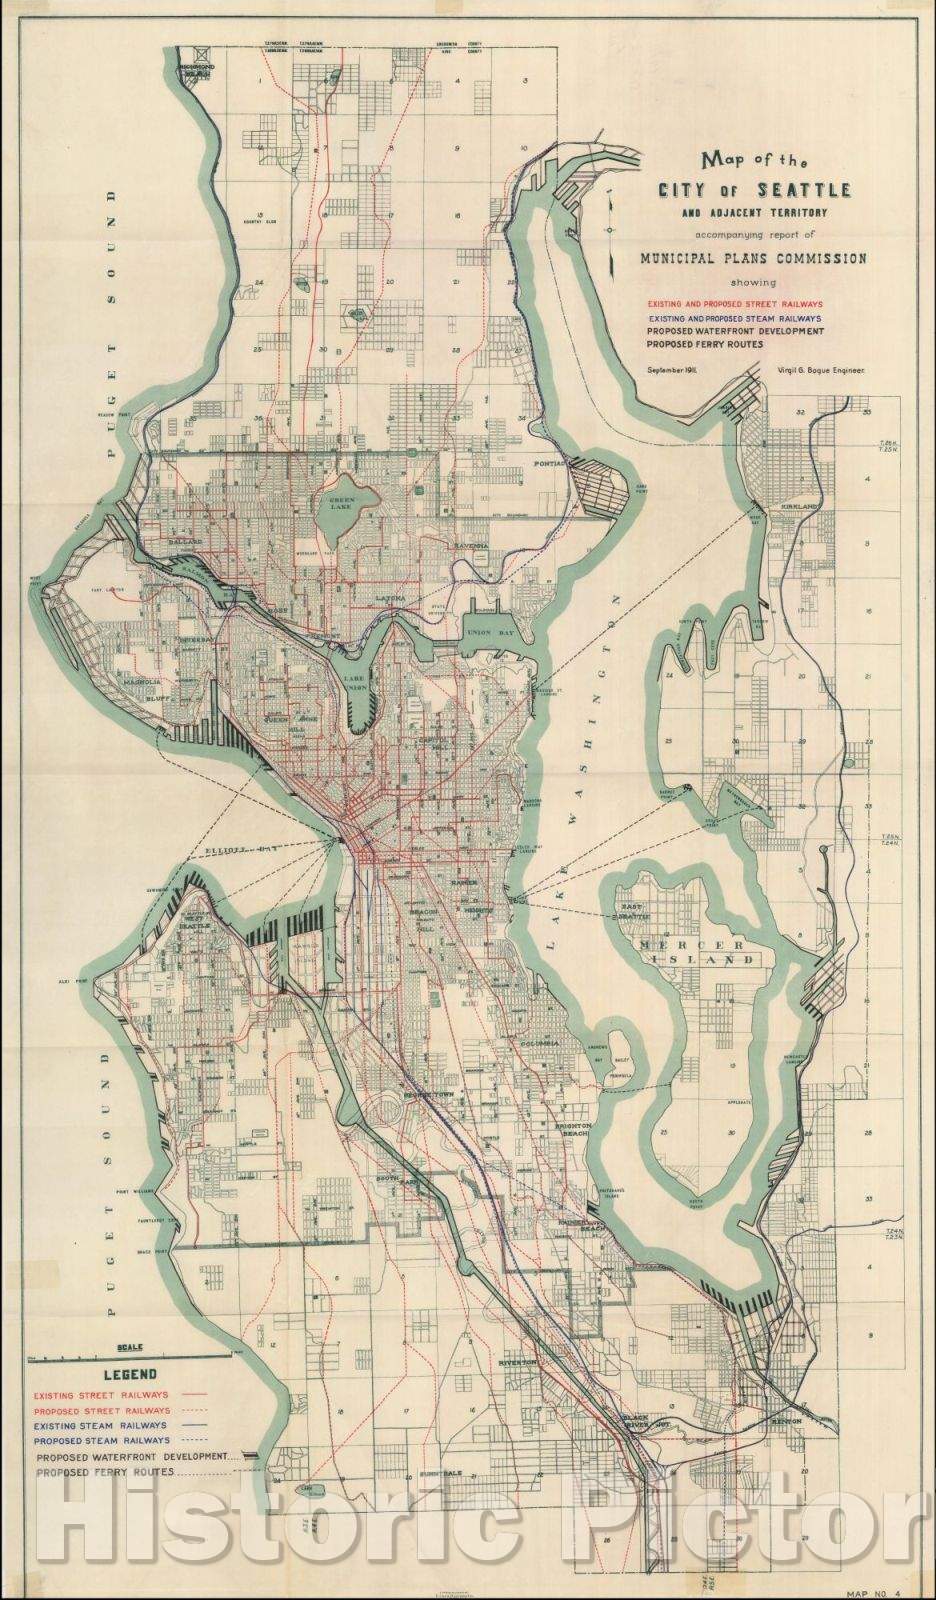 Historic Map - Map of the City of Seattle and Adjacent Territory accompany report of Municipal Plans Commission showing Existing and Proposed Railways, 1911 v2